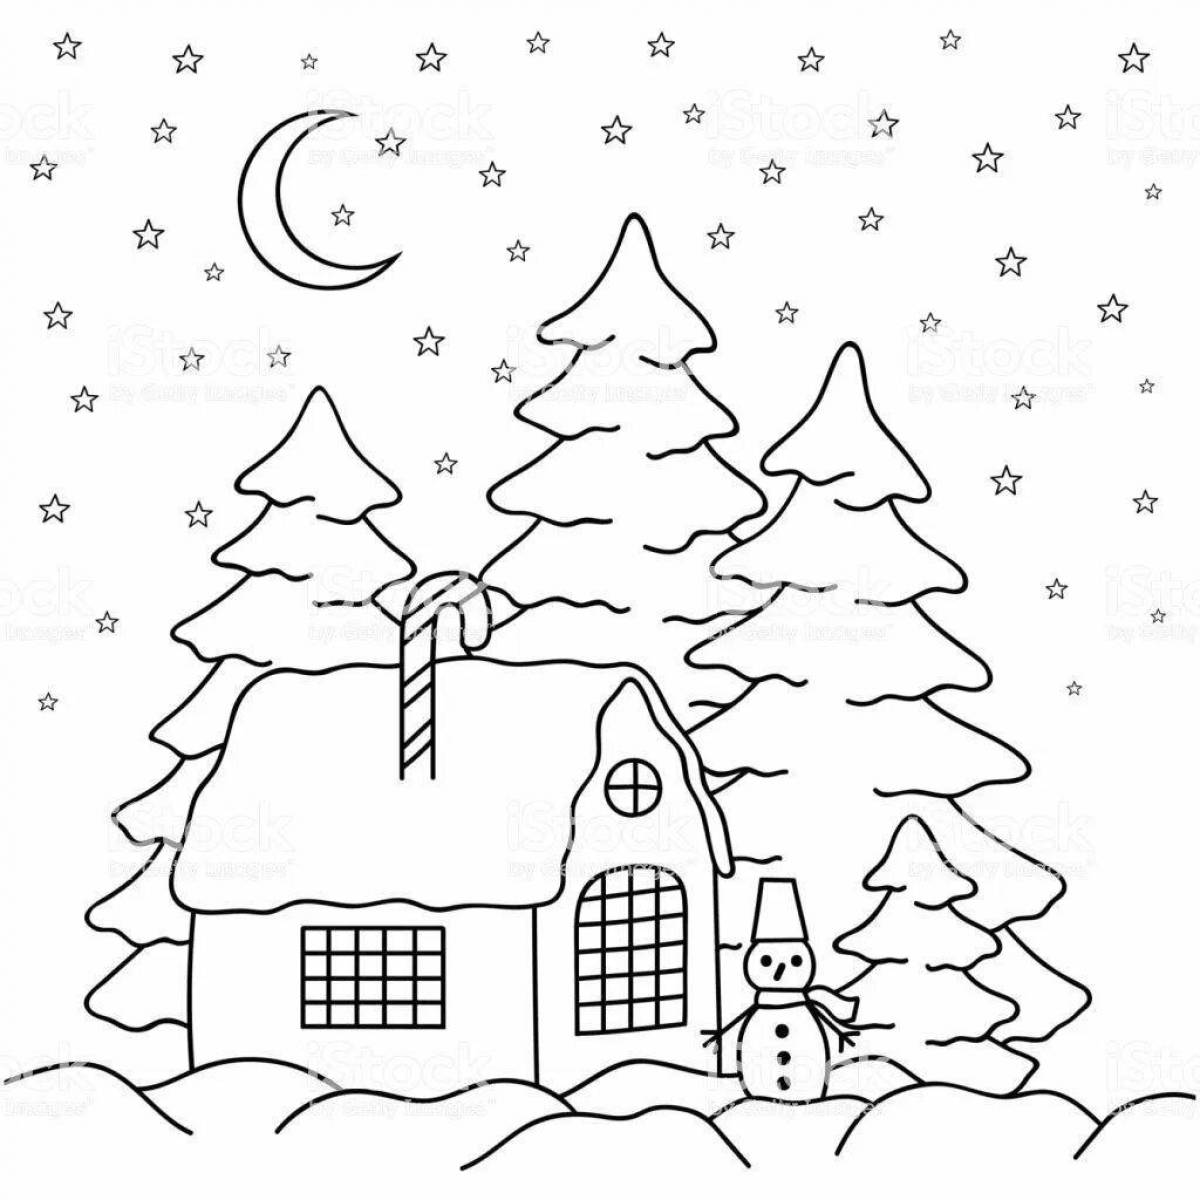 Shiny winter forest coloring page for 10 year olds